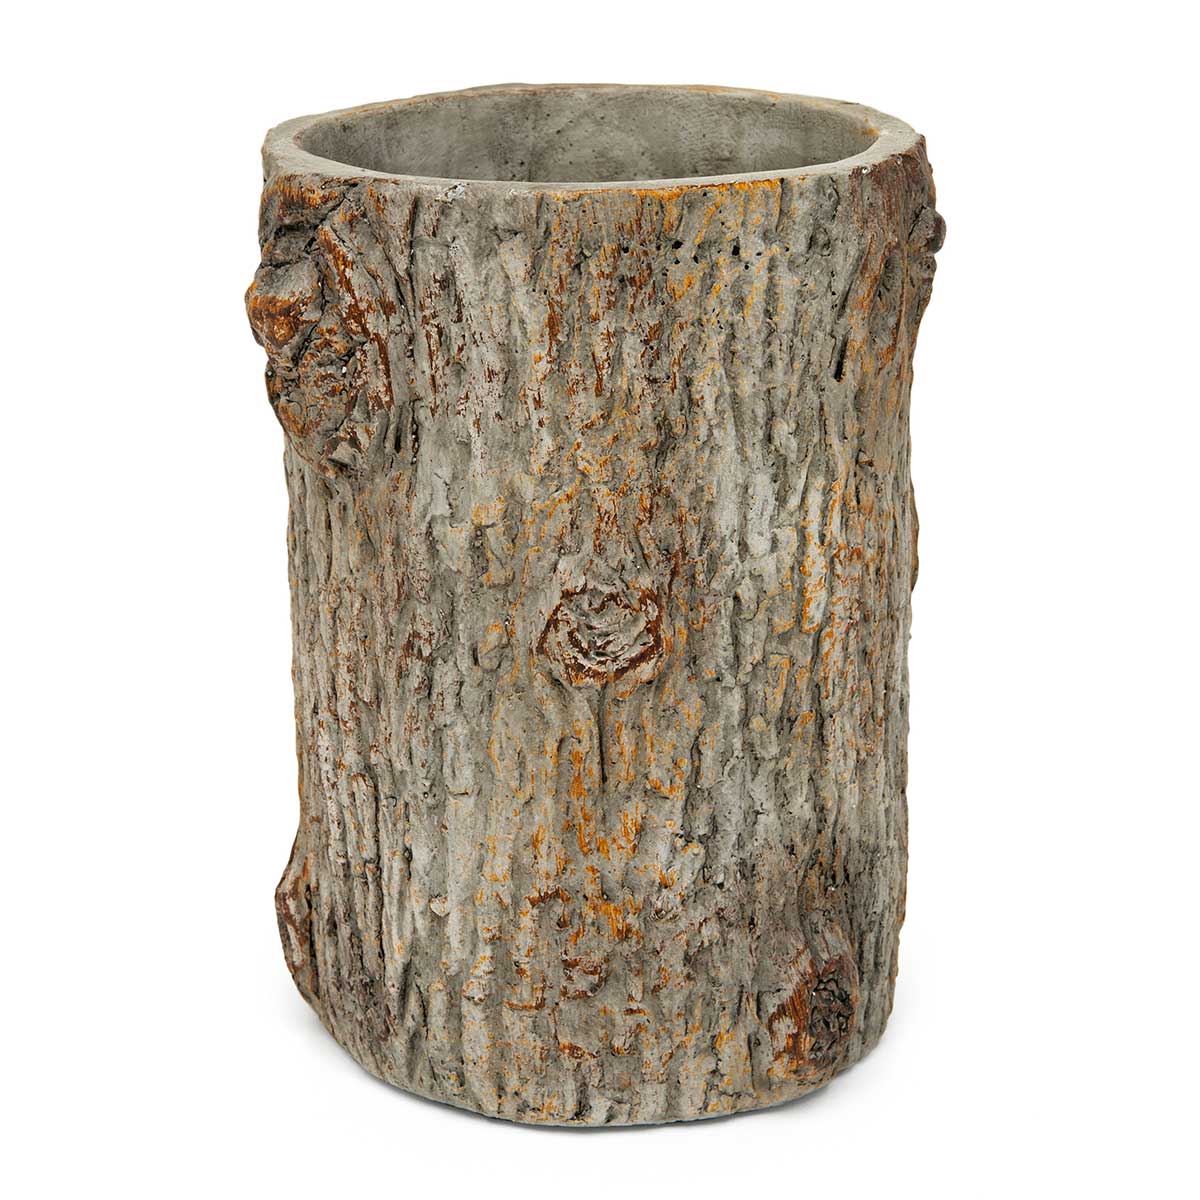 POT TREE TRUNK TALL 5IN X 7IN BROWN CONCRETE - Click Image to Close